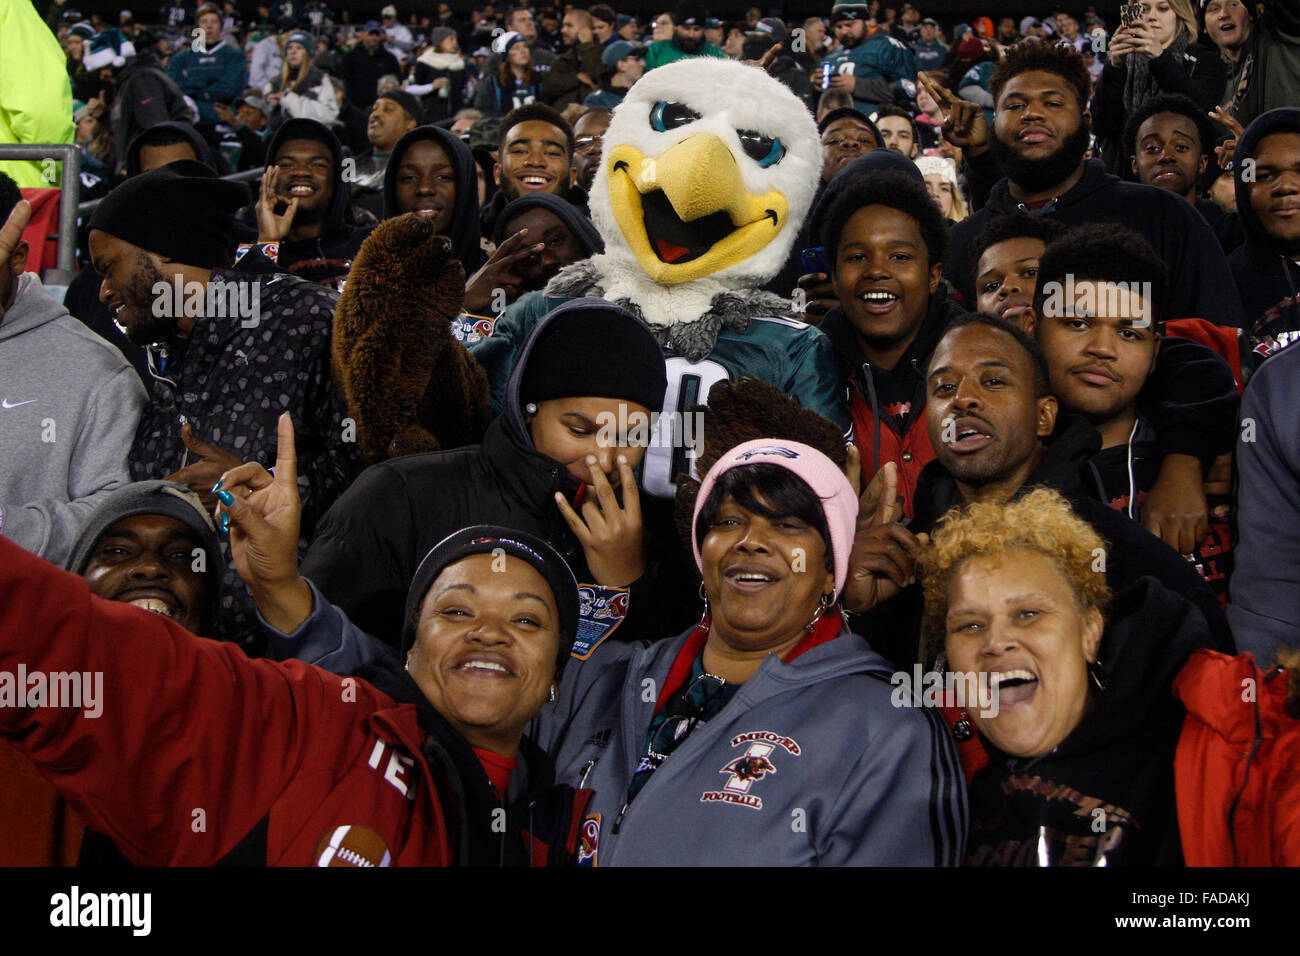 December 26, 2015: Philadelphia Eagles mascot Swoop interacts with the fans during the NFL game between the Washington Redskins and the Philadelphia Eagles at Lincoln Financial Field in Philadelphia, Pennsylvania. The Washington Redskins won 38-24 to win the NFC East. Christopher Szagola/CSM Stock Photo